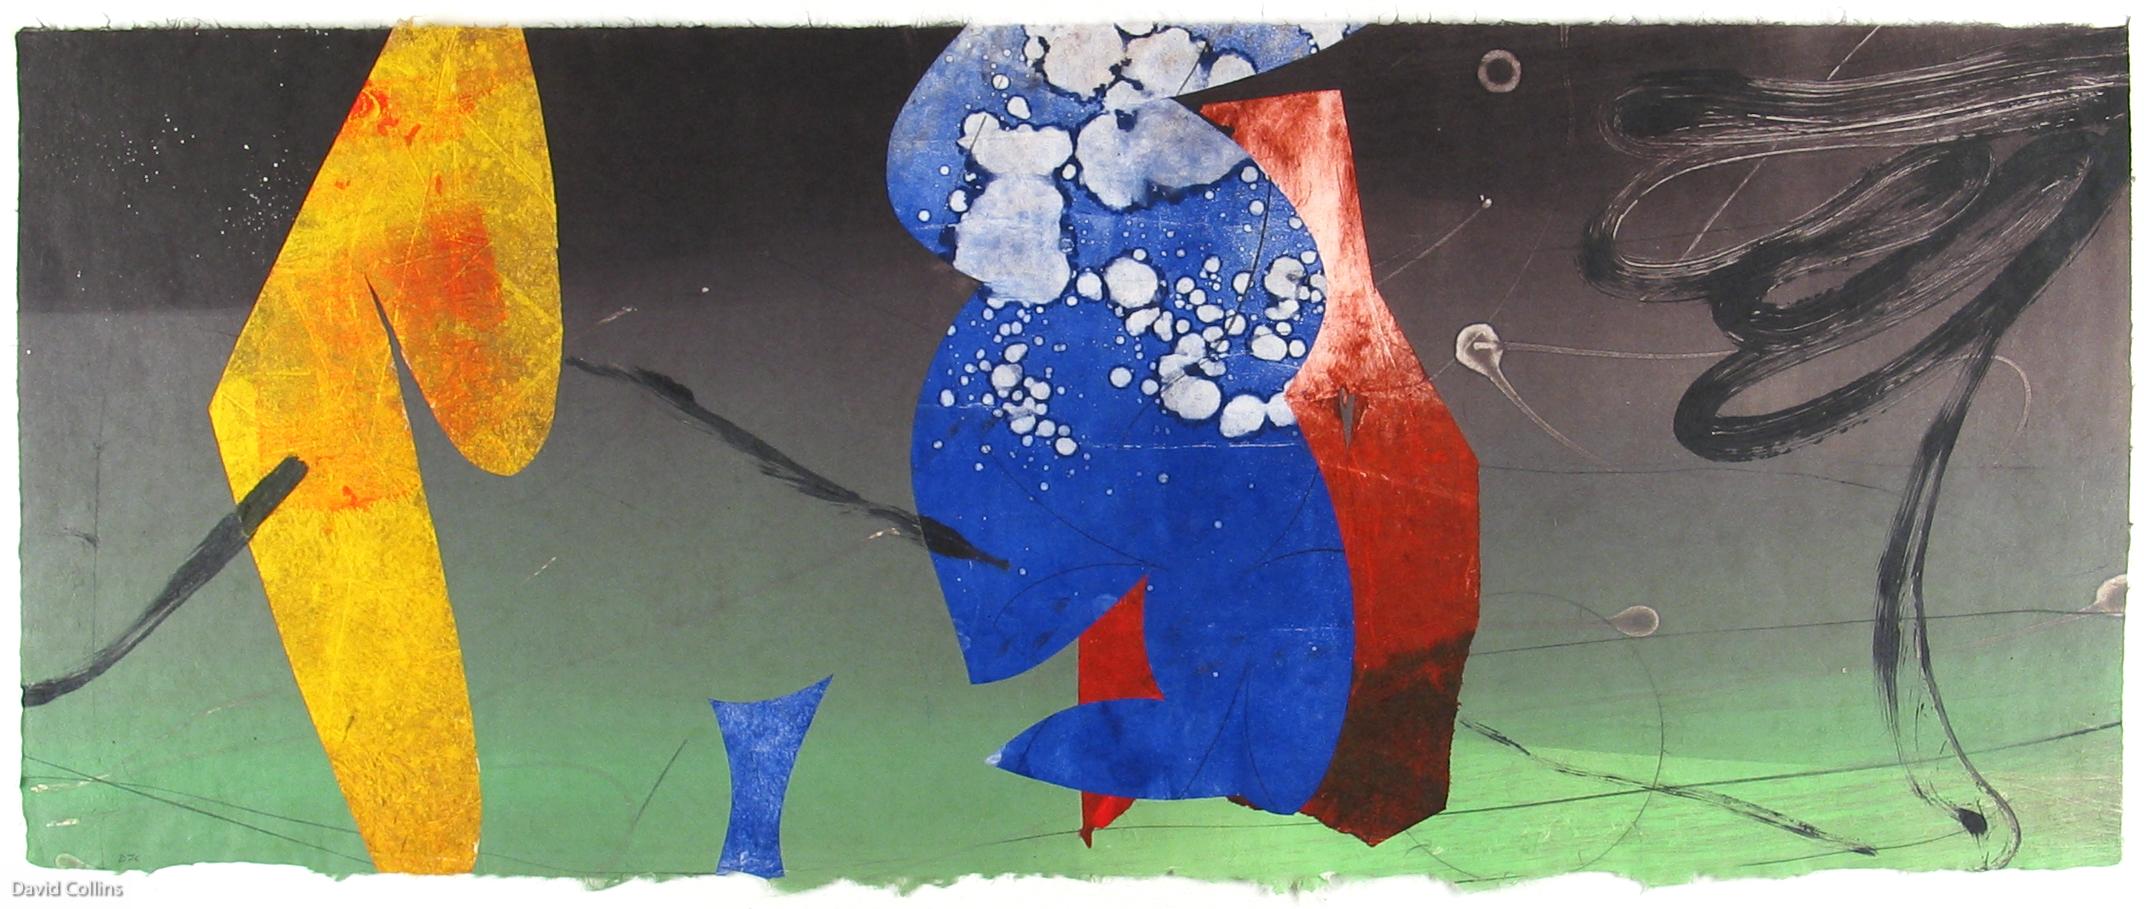 David Collins Abstract Print - Pilot Jack 17, blue and red geometric abstract monotype on Asian paper, framed